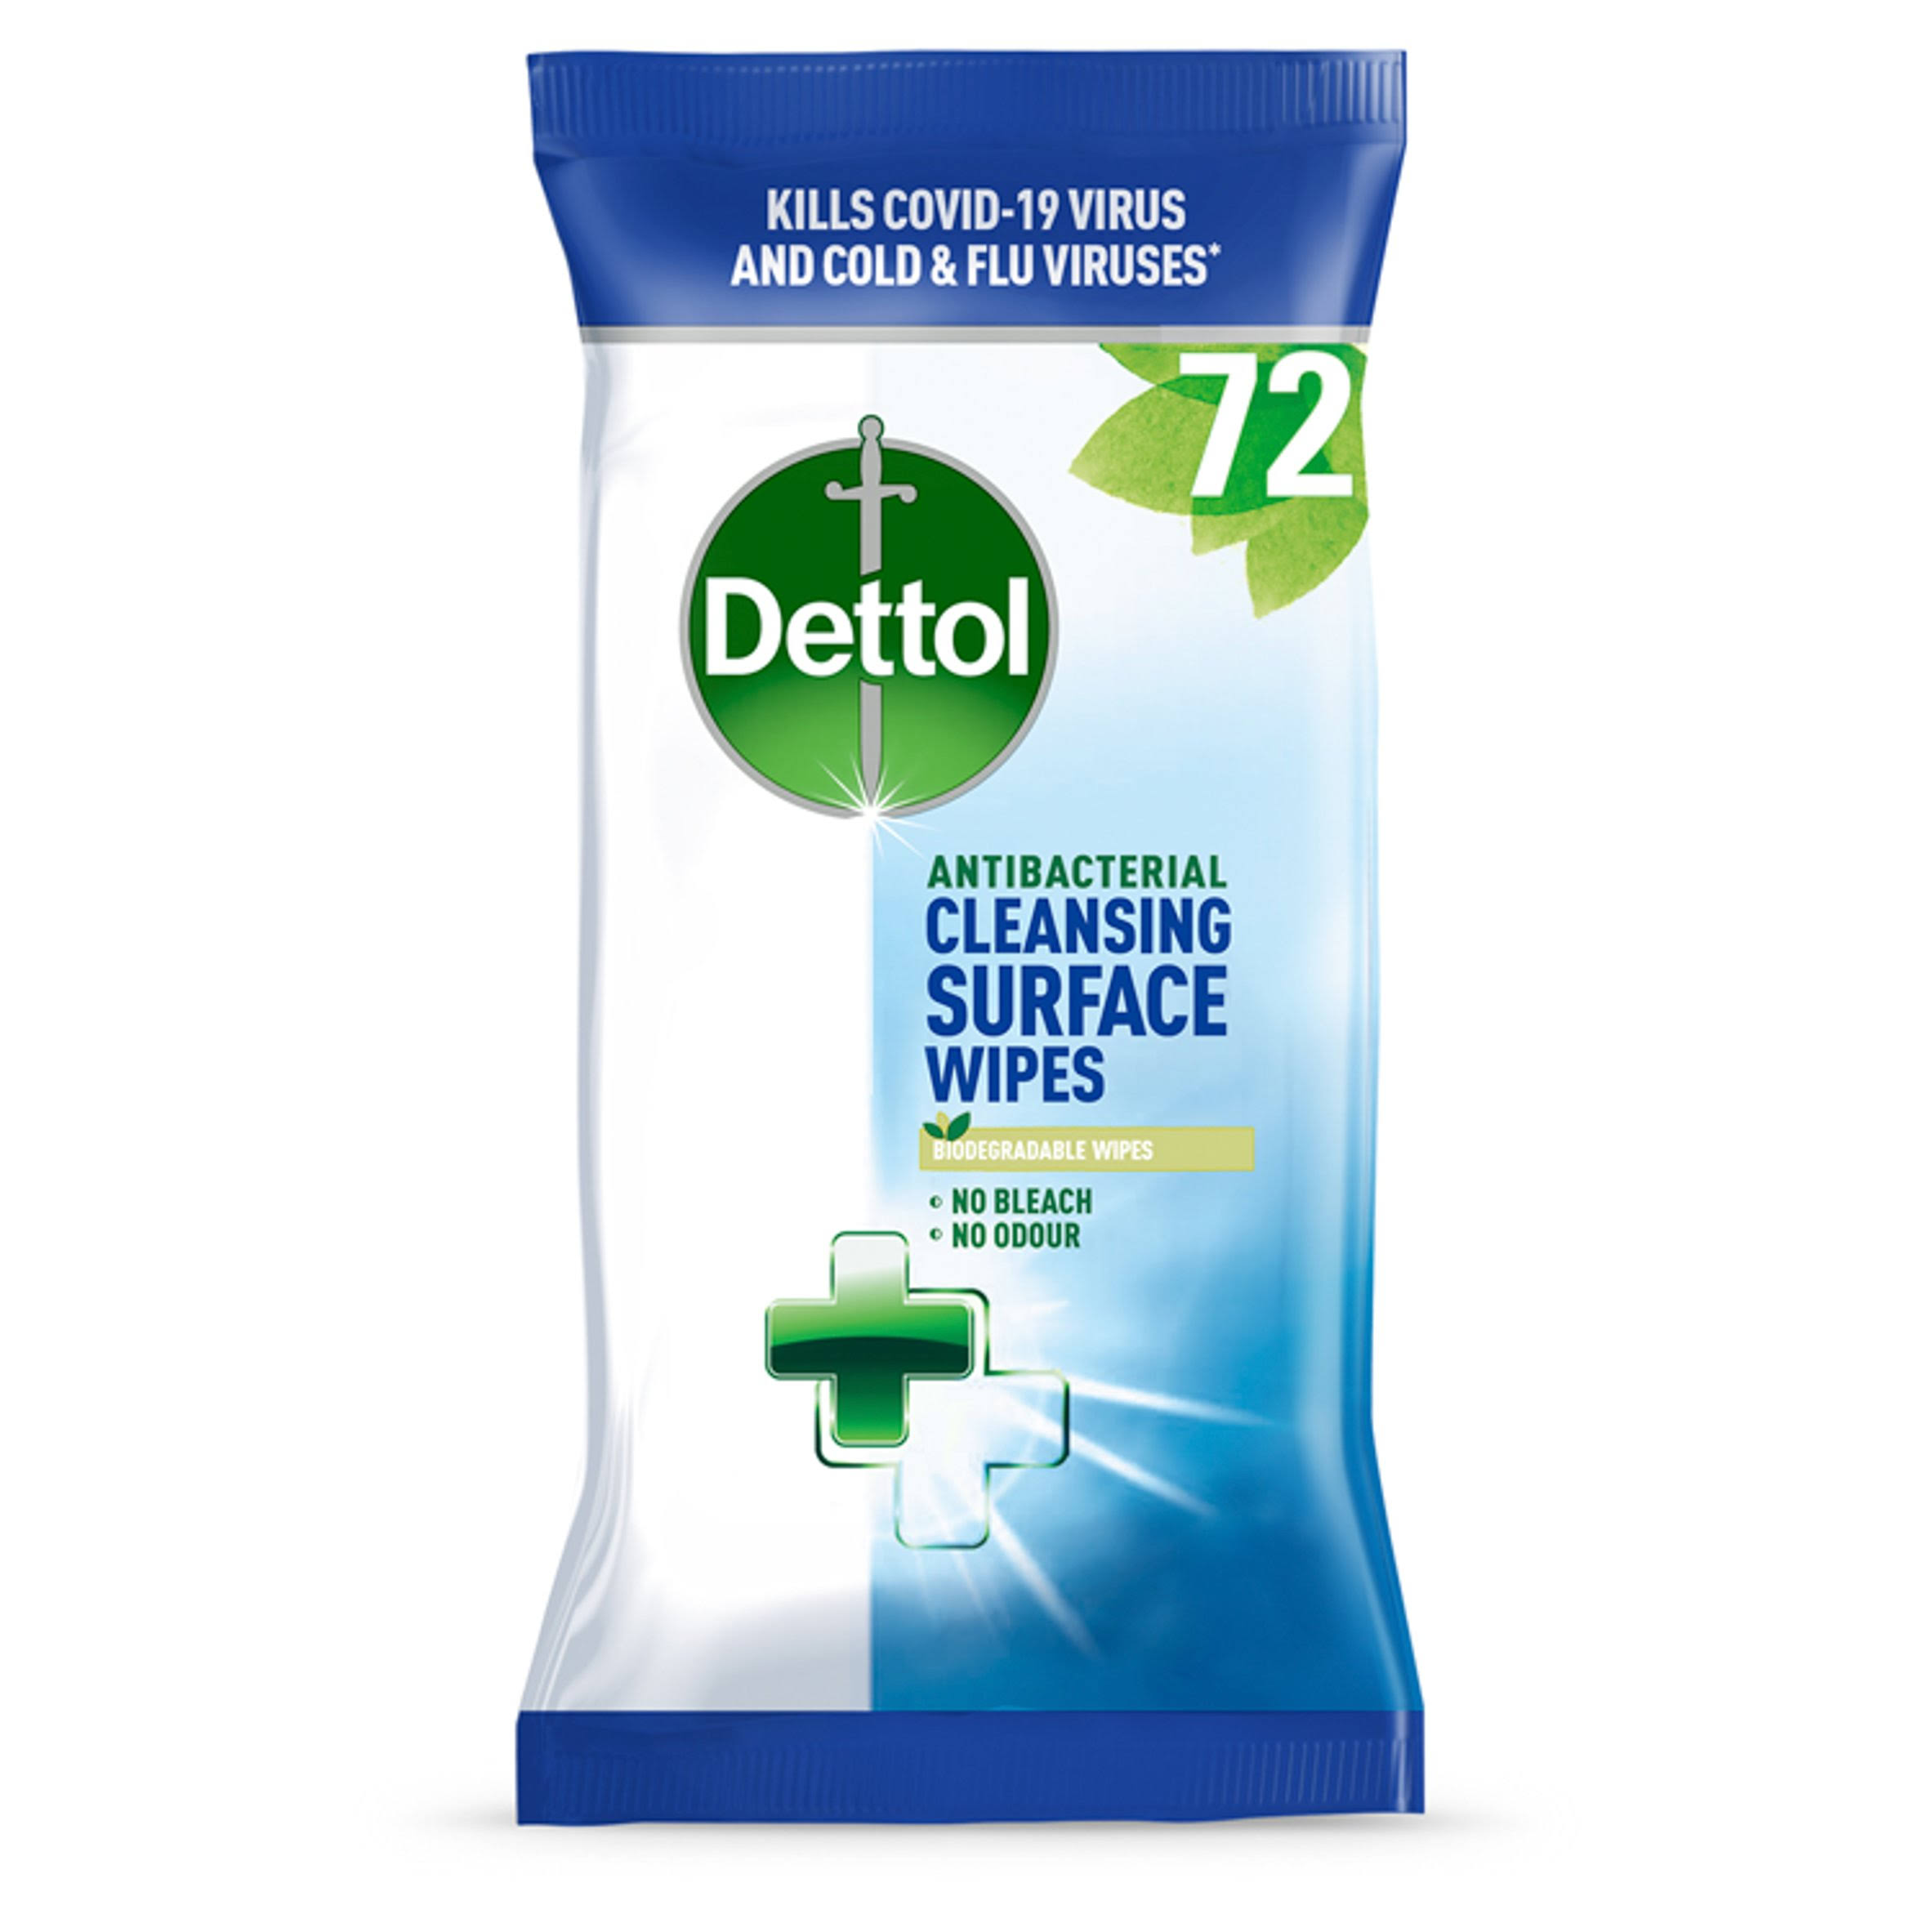 Reckitts Dettol Anti-Bacterial Wipes x 72